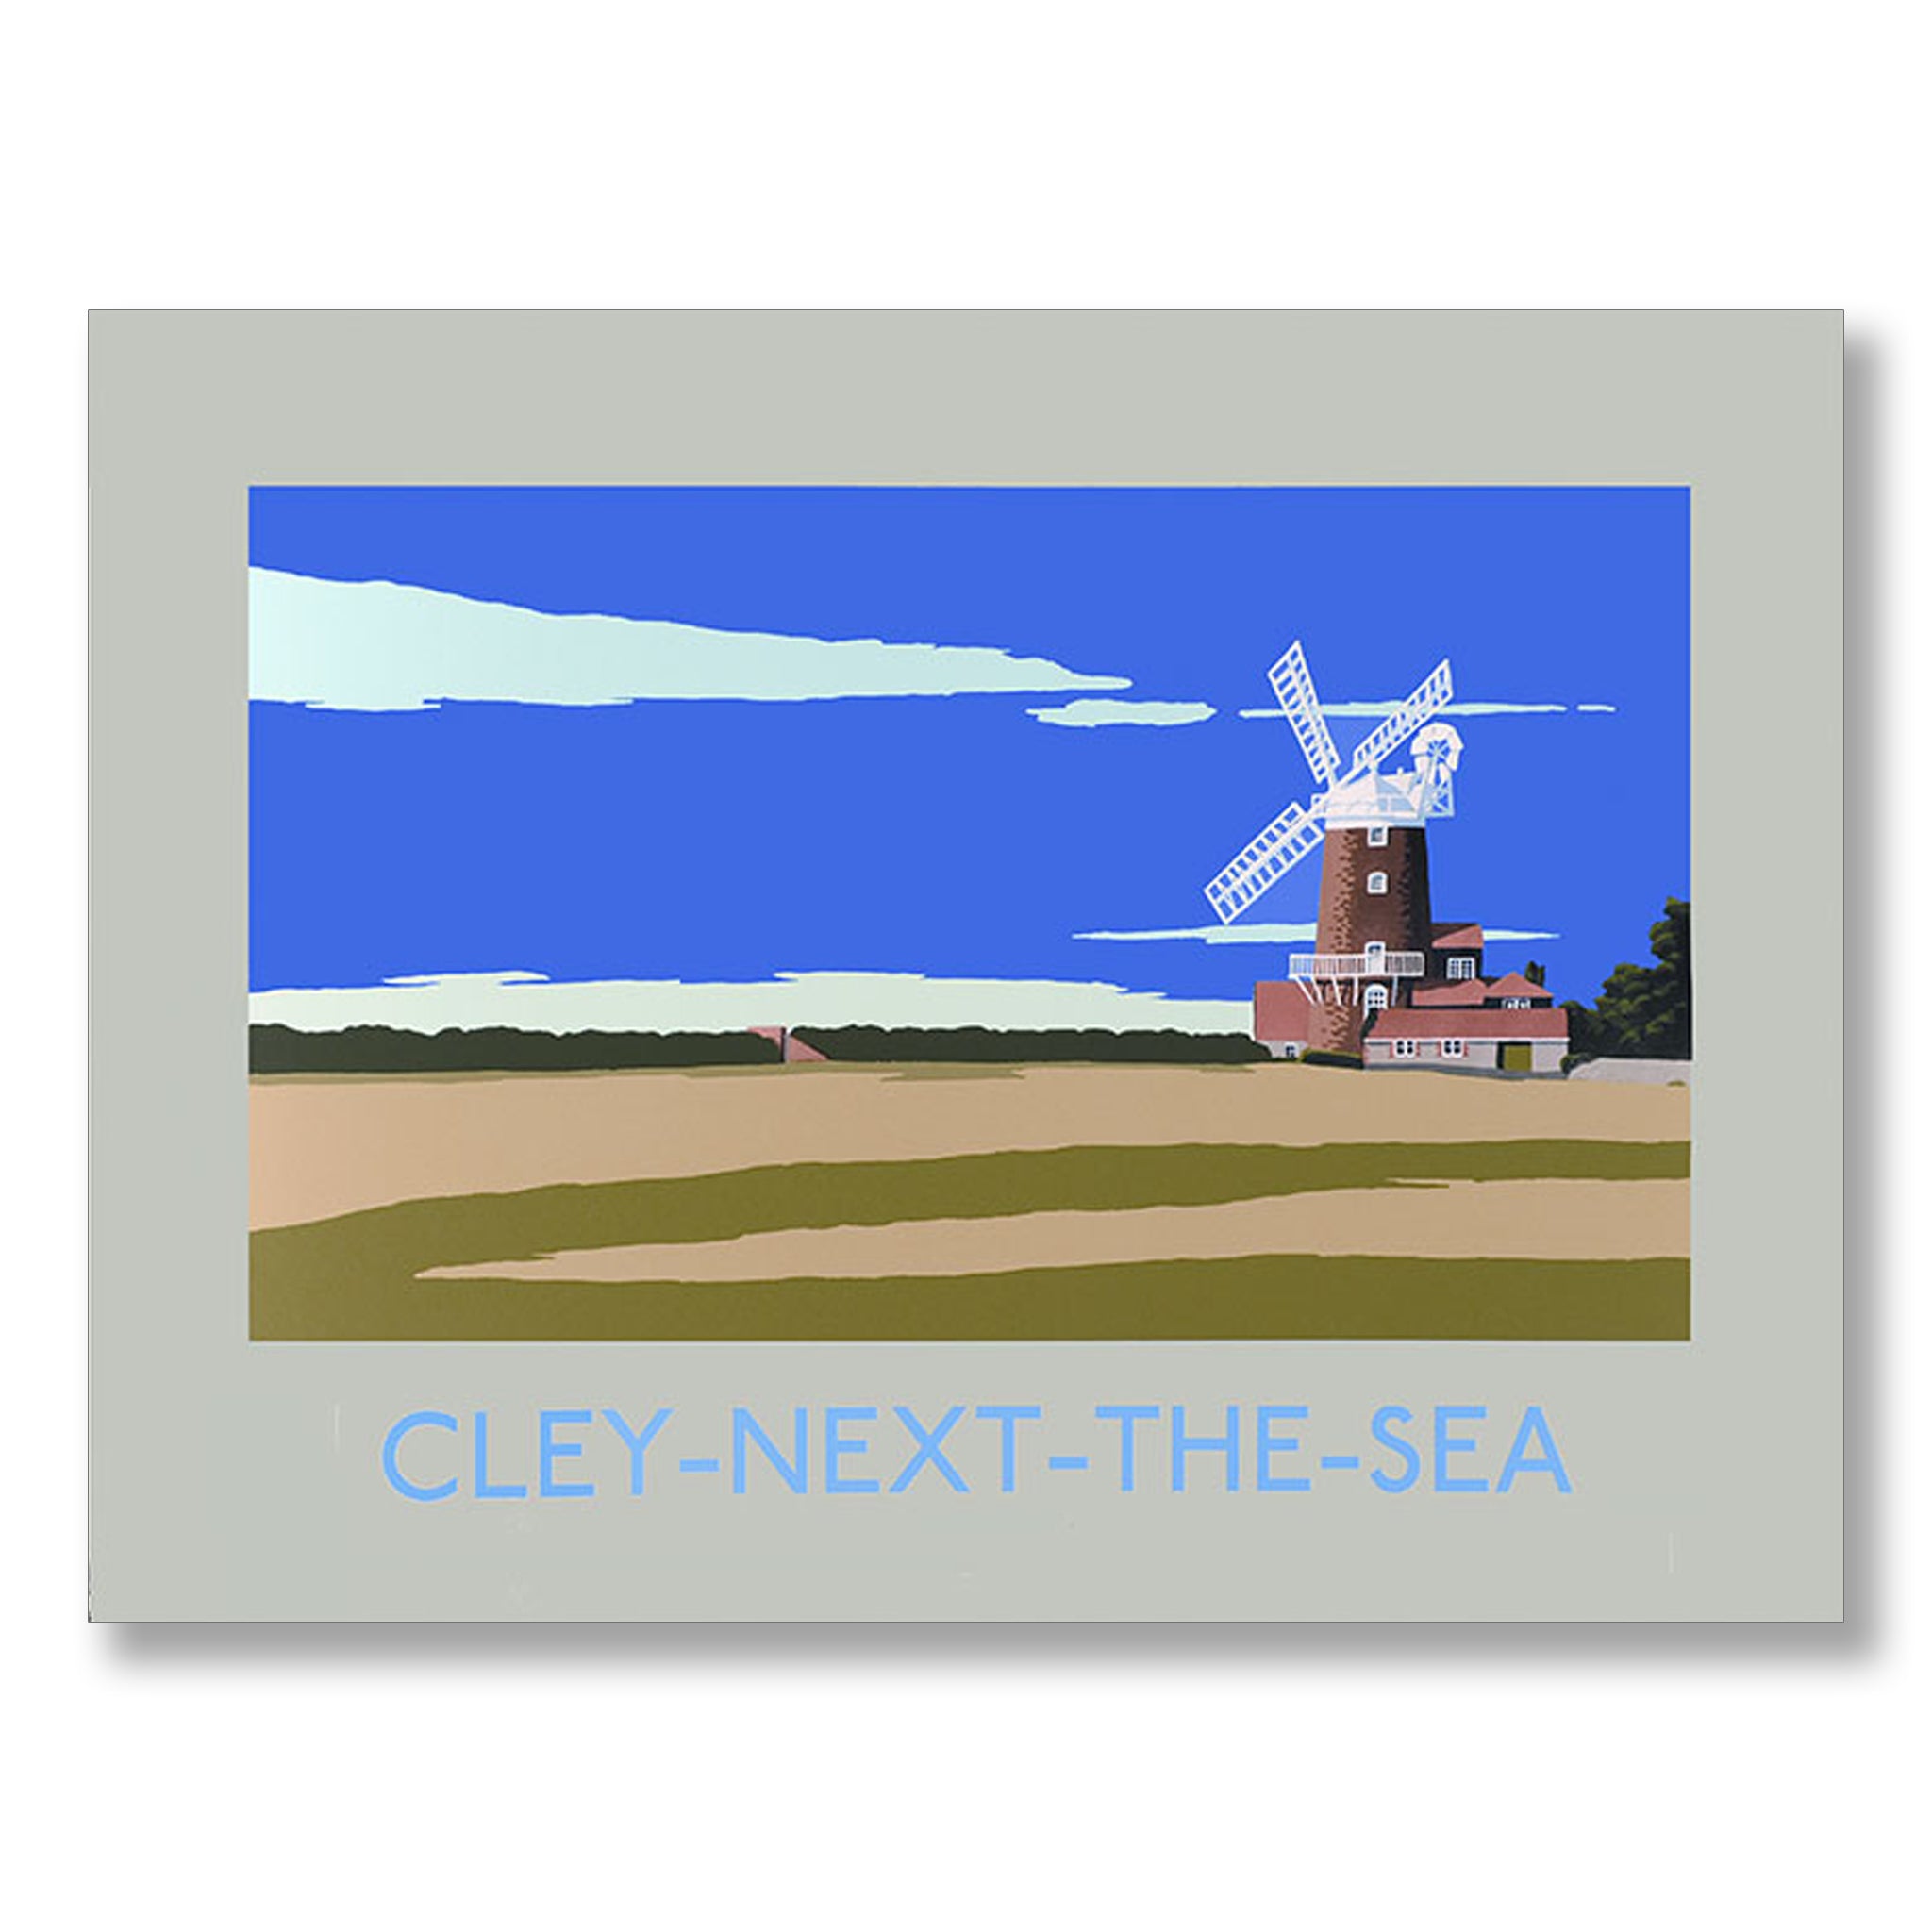 Cley-Next-The-Sea by David Kirk